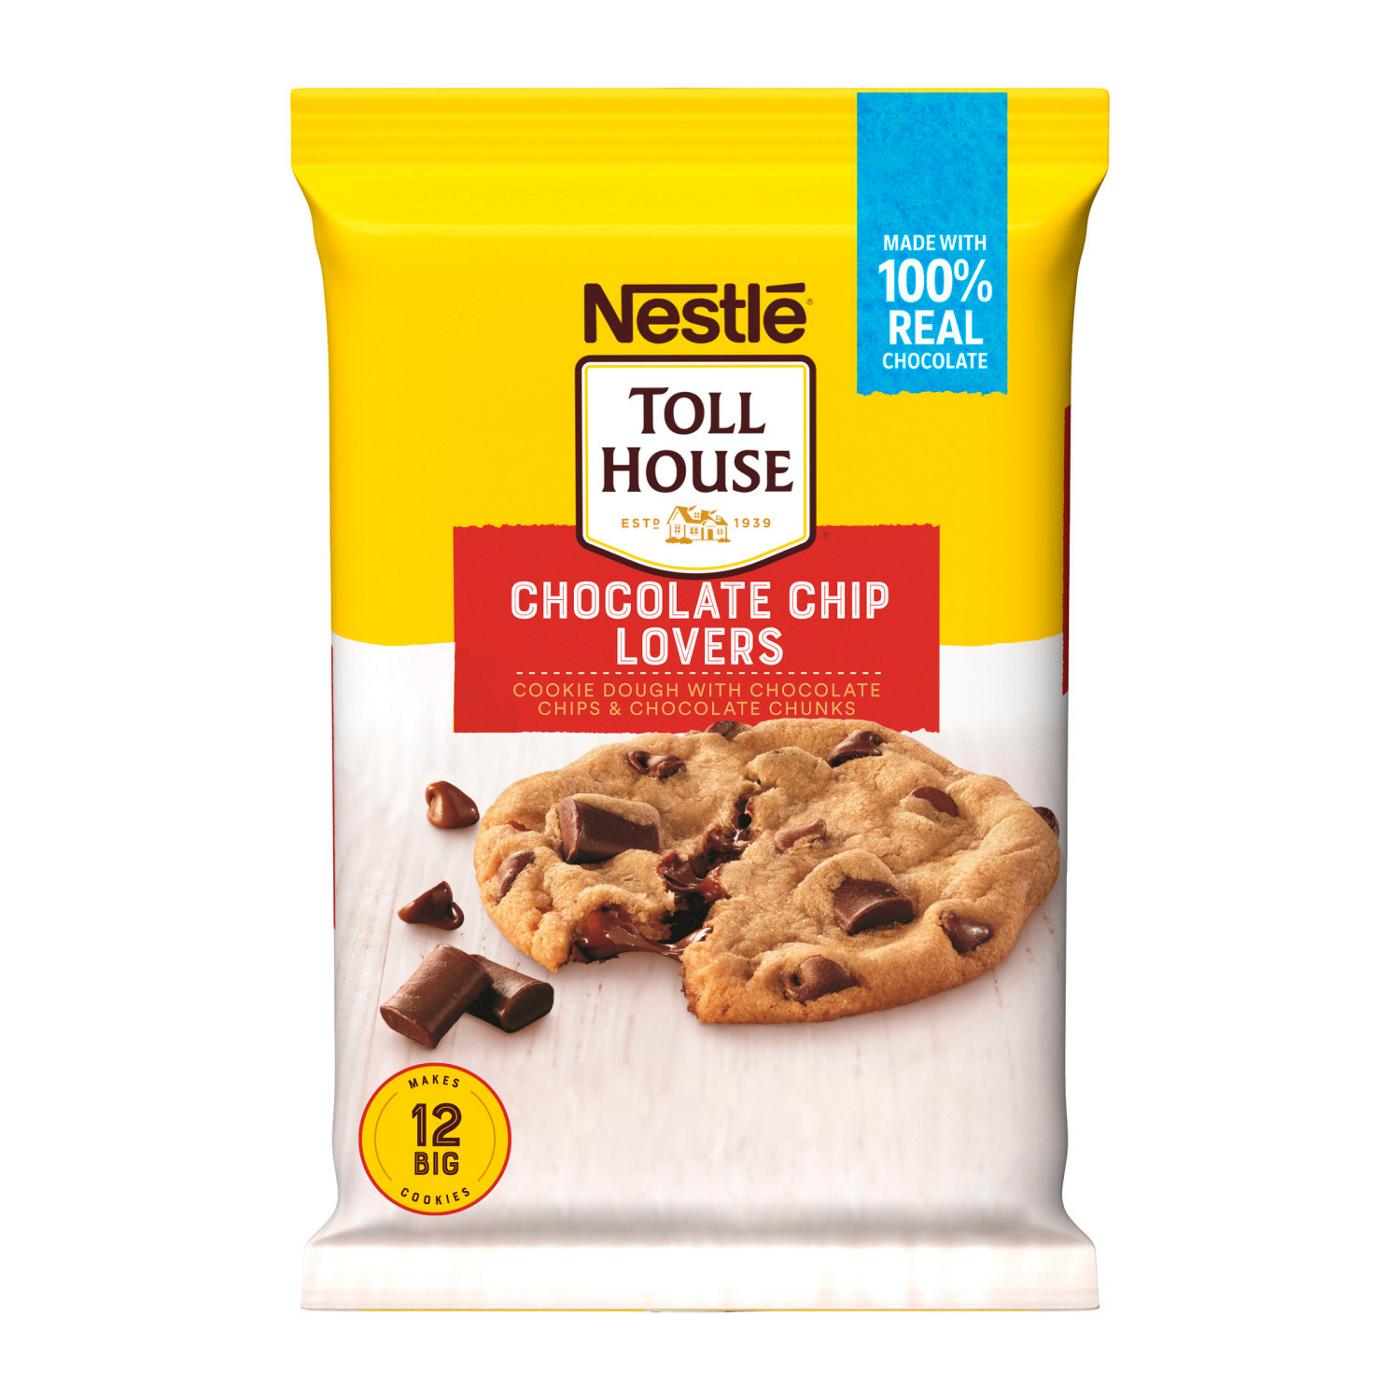 Nestle Toll House Cookie Dough - Chocolate Chip Lovers; image 1 of 5